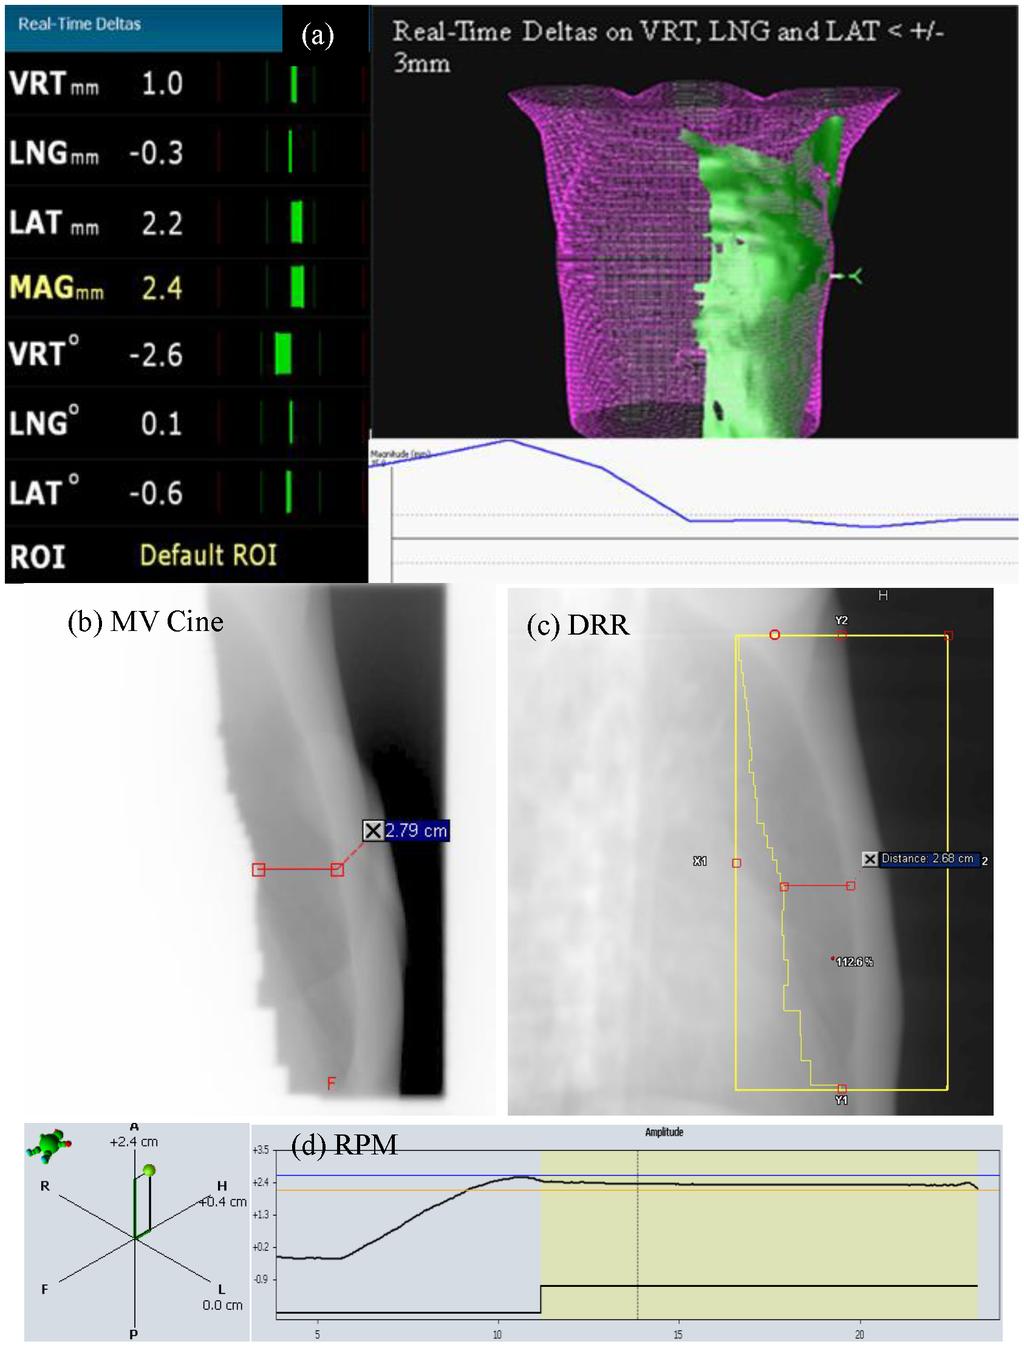 Surface Surrogate for Left Breast DIBH Treatment Figure 1. Displays of AlignRT system, MV Cine imaging, DRR, and the RPM system for treatments.